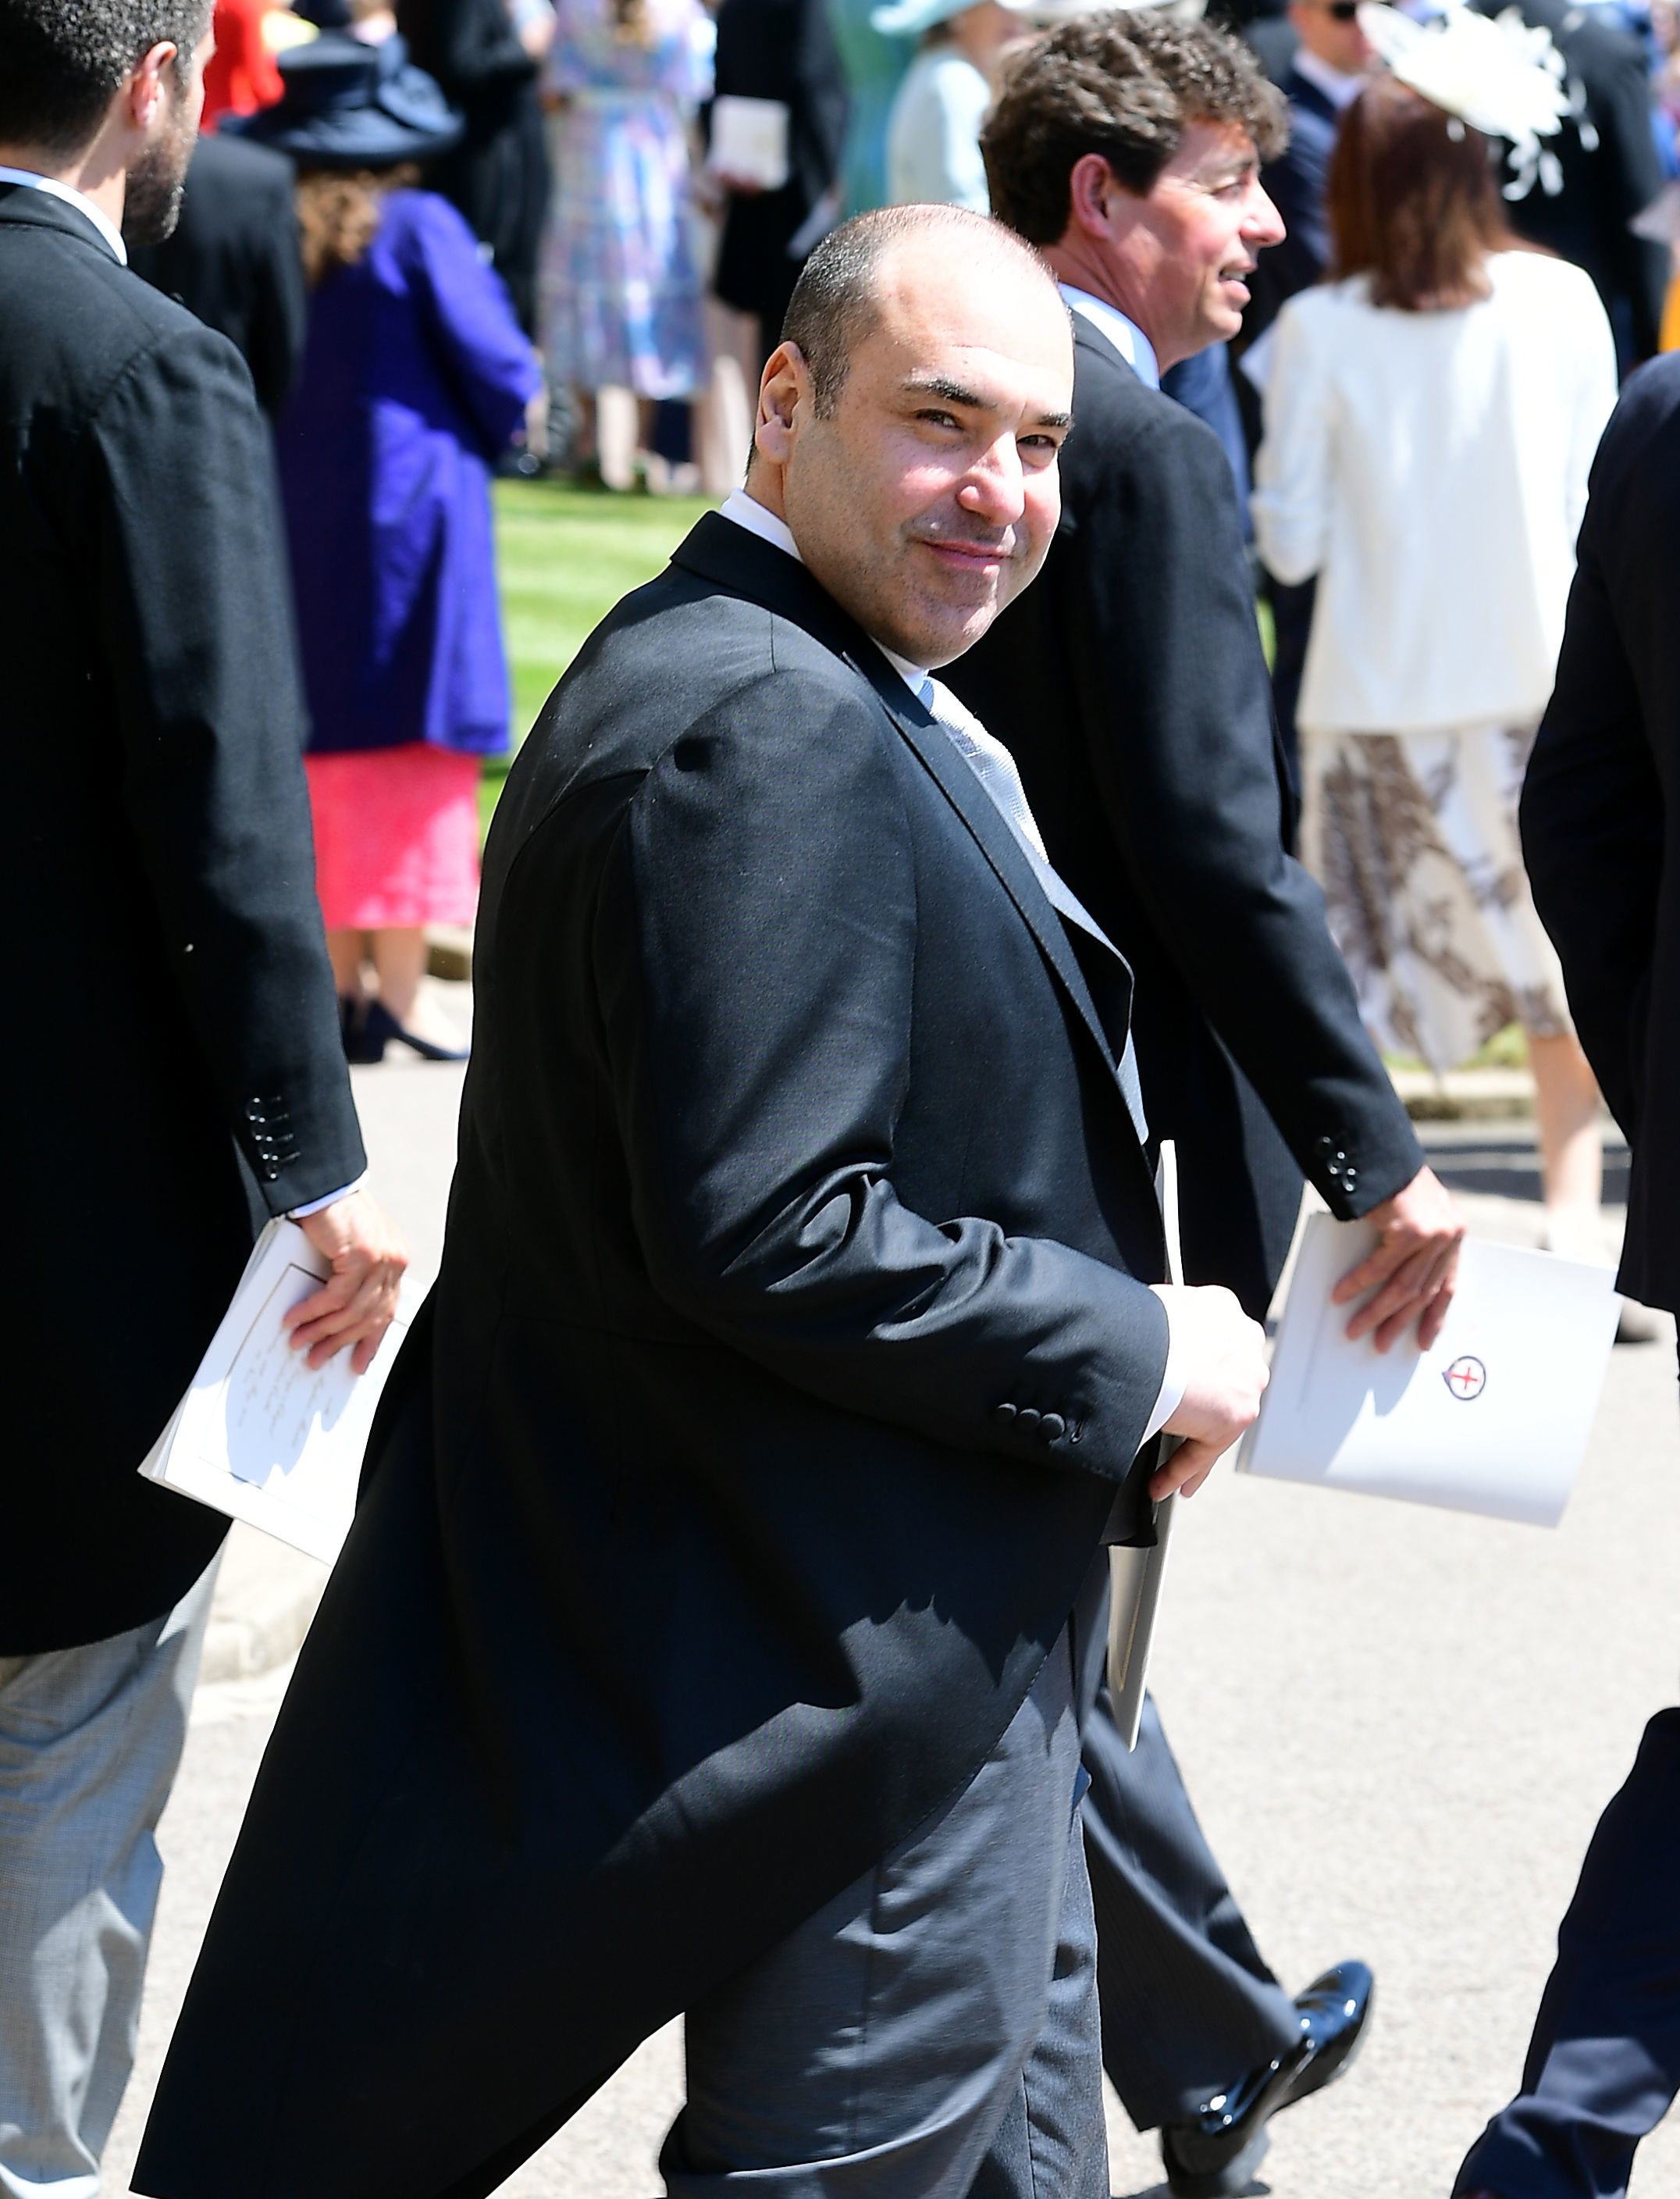 Rick Hoffman arrive at St George's Chapel at Windsor Castle before the wedding of Prince Harry to Meghan Markle in Windsor, England, on May 19, 2018. | Source: Getty Images